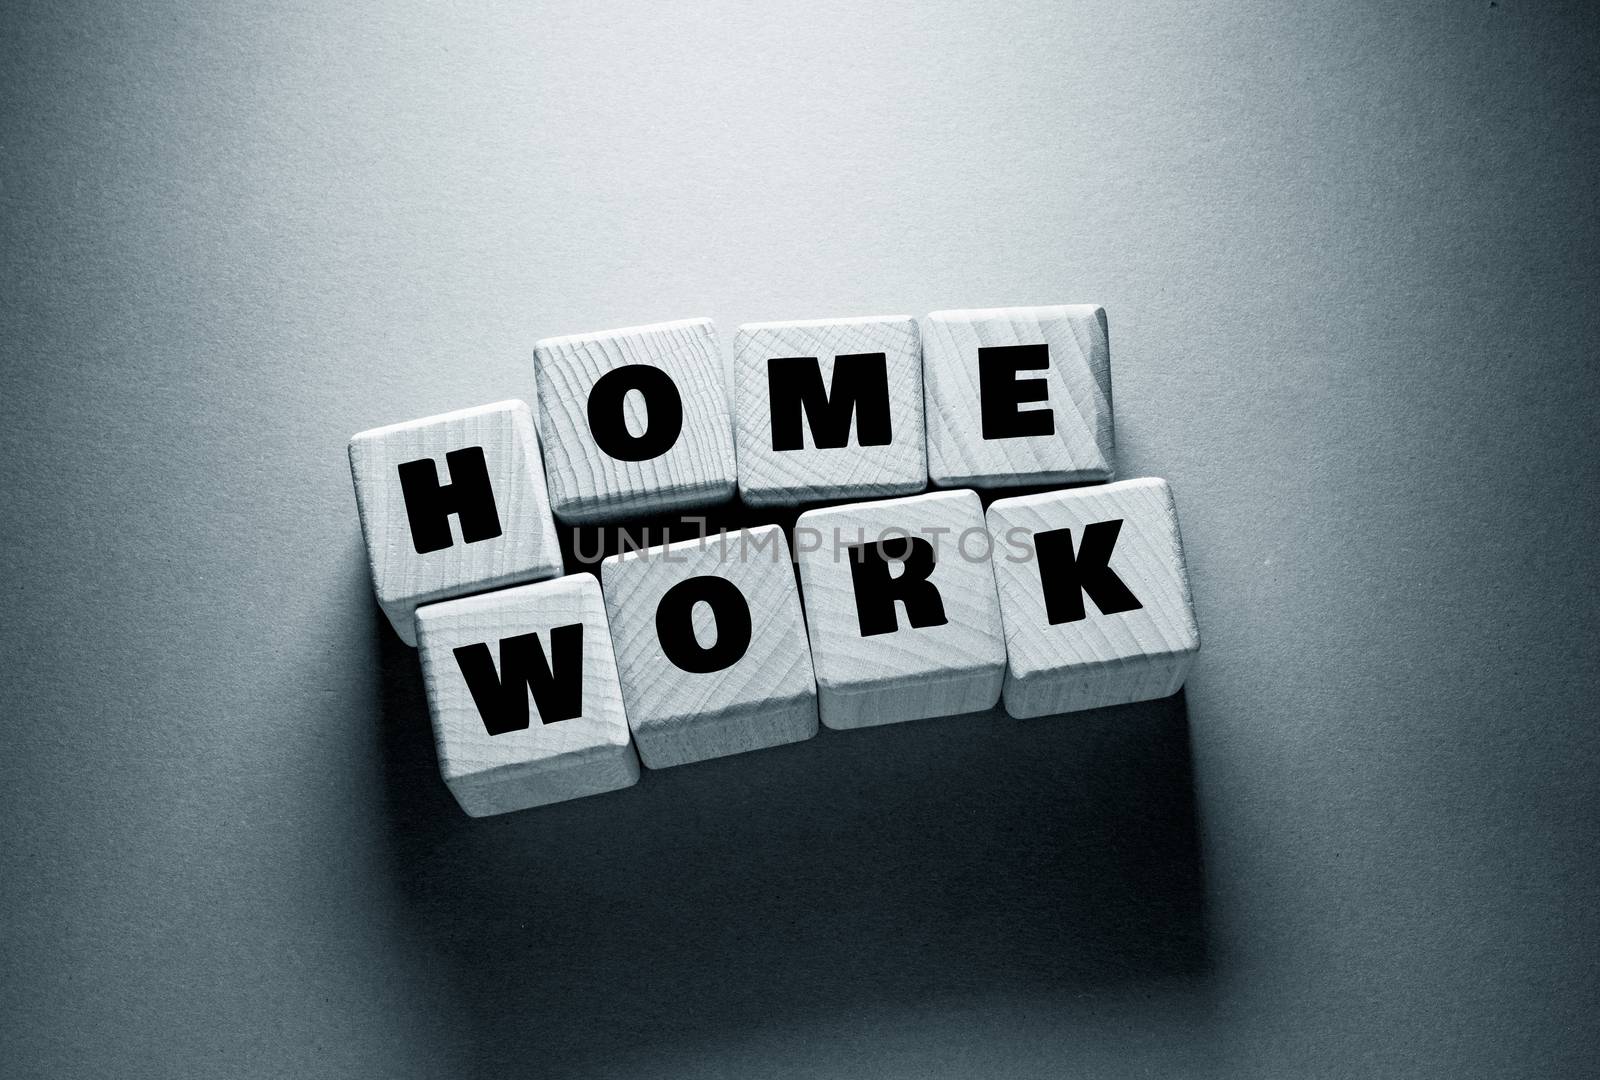 Home Work Word with Wooden Cubes by Jievani